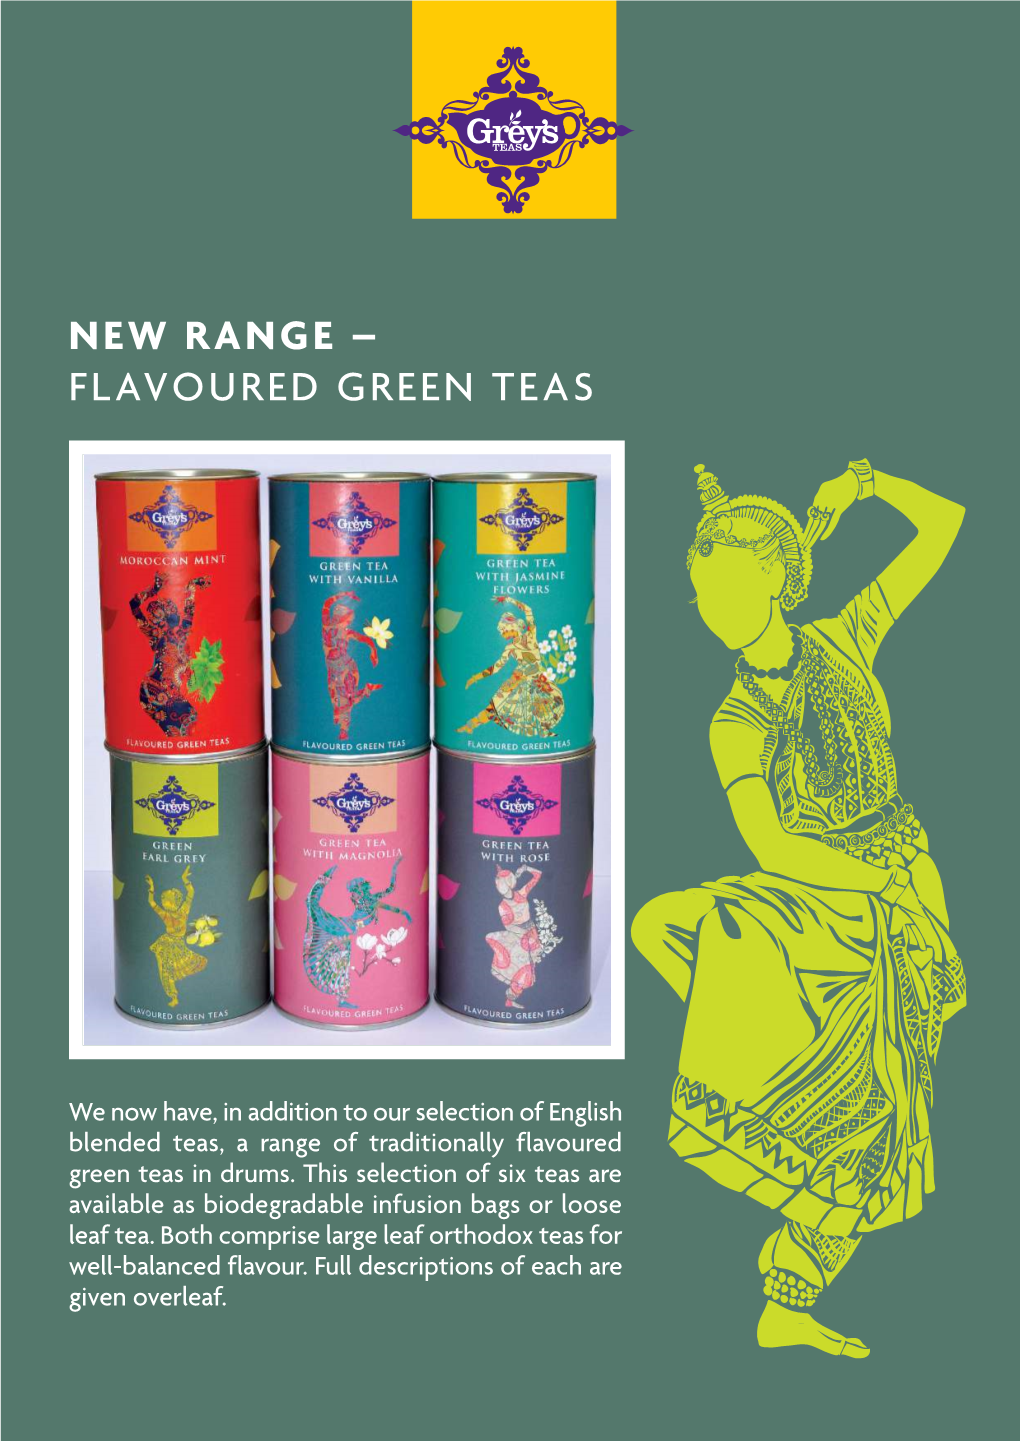 Flavoured Green Teas in Drums